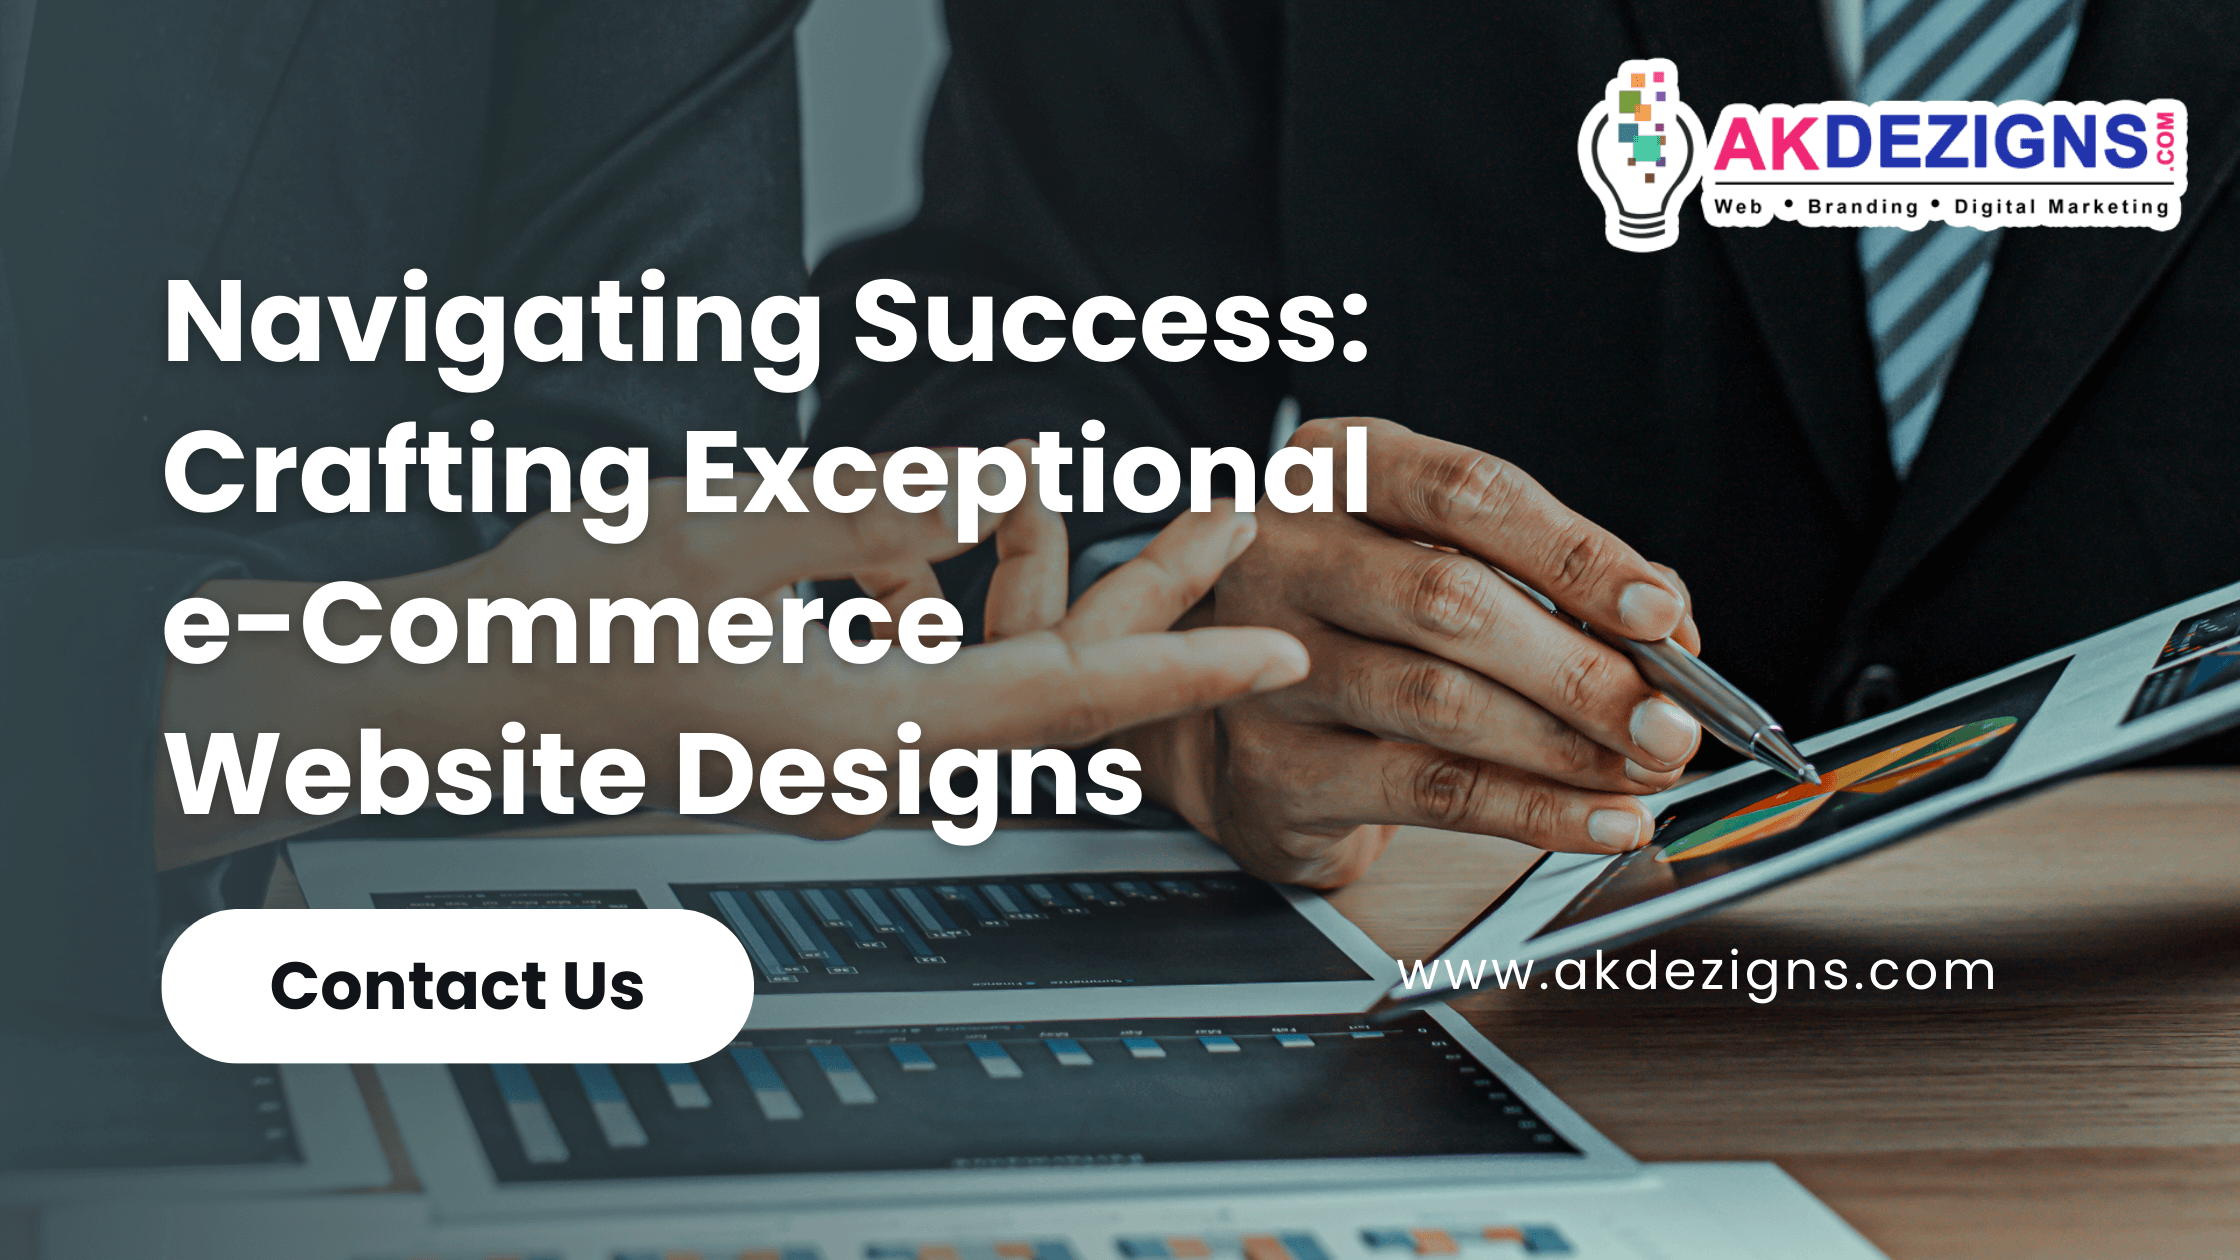 Navigating Success Crafting Exceptional e-Commerce Website Designs